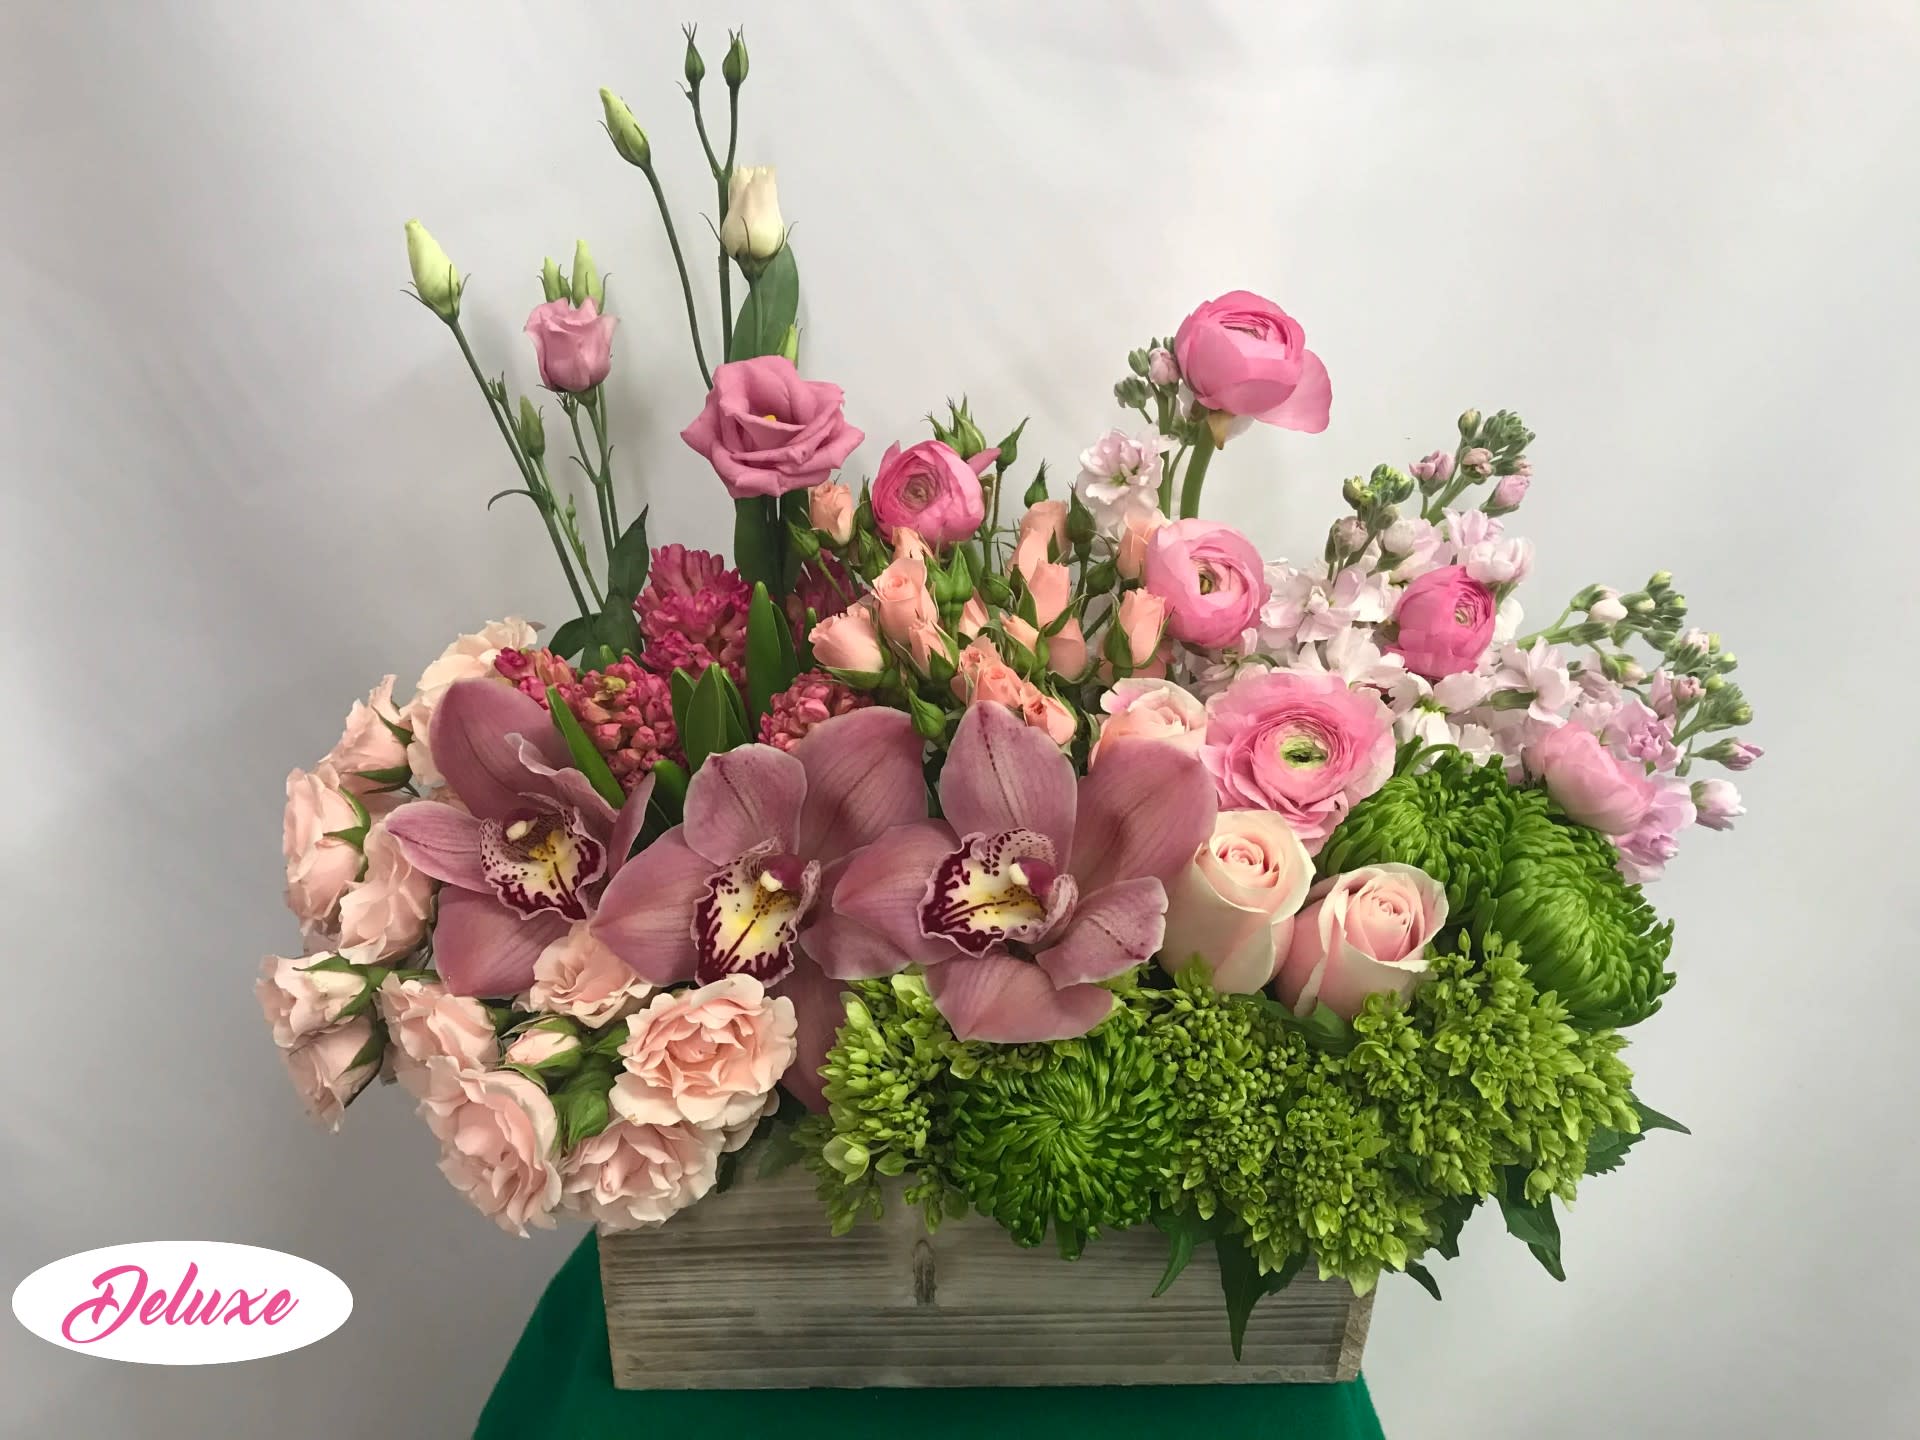 Modern Farmhouse - This arrangement is so sweet in a rustic wooden container. Farmhouse Chic is the new trend &amp; this just screams it! Beautiful Orchids, Sweetheart Roses, Lisianthus and Asters compliment  each other in all the shades of pink! A touch of green is the contrast this arrangement needs all in a keepsake wooden rectangle box. 